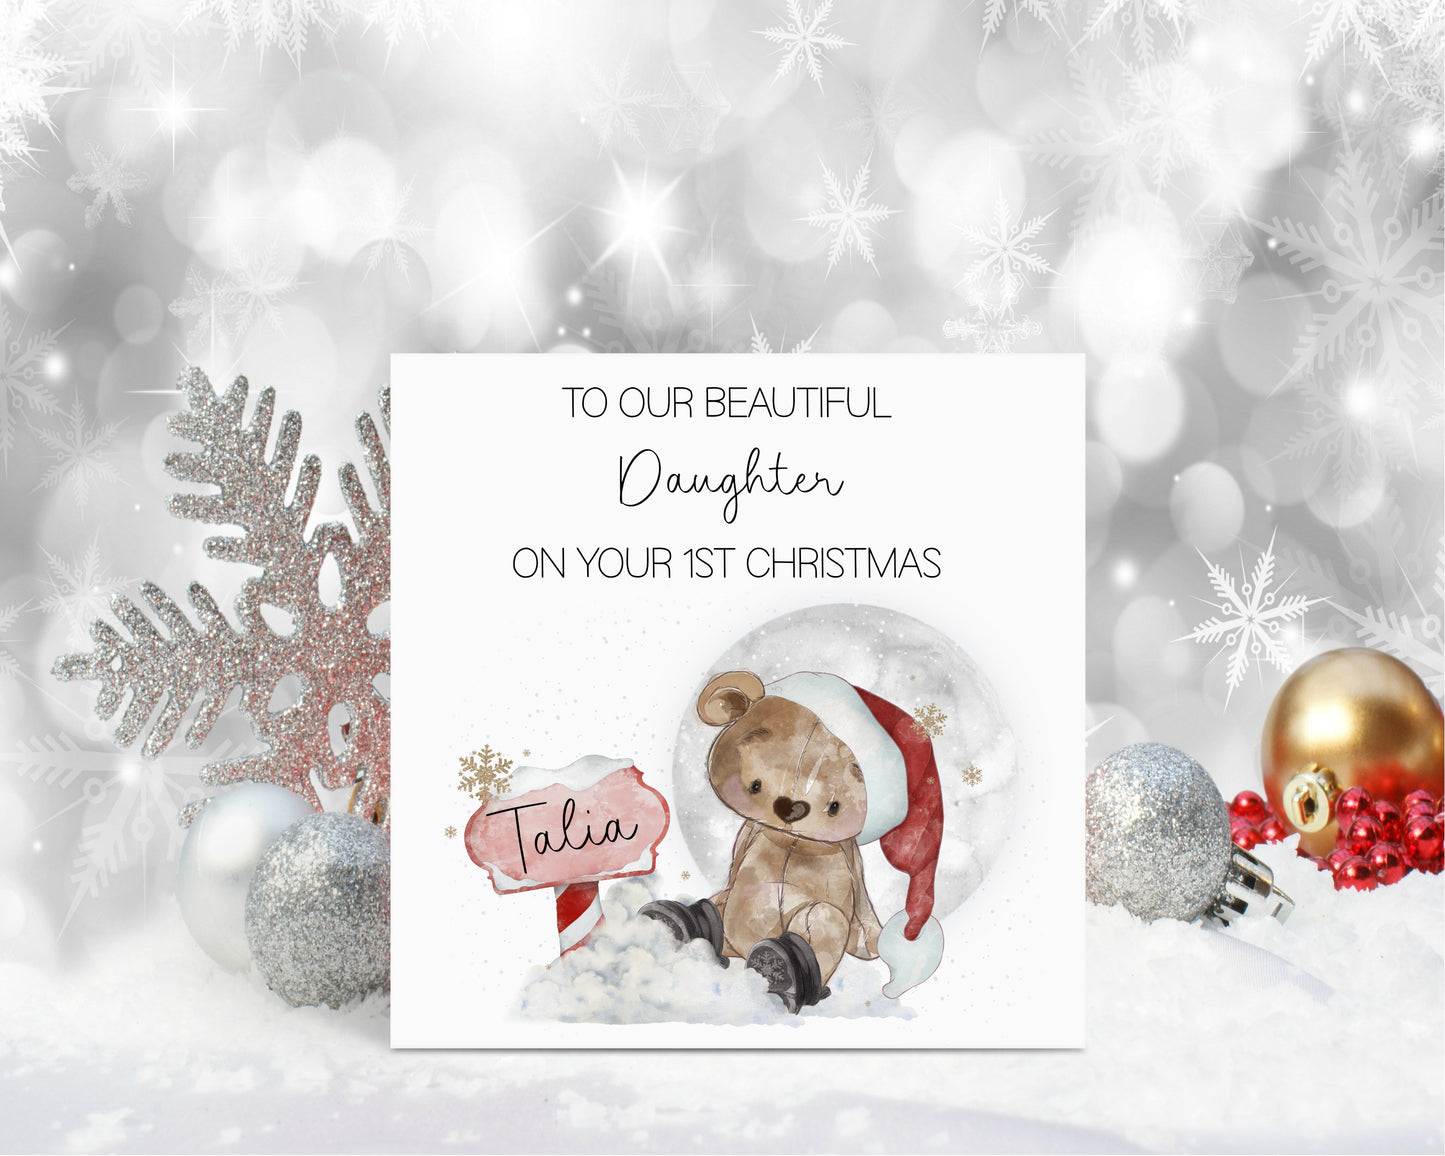 Great Niece 1st Christmas Card, Christmas Card For Great Niece, Baby's 1st Xmas Card, Personalised Christmas Card, Christmas In July